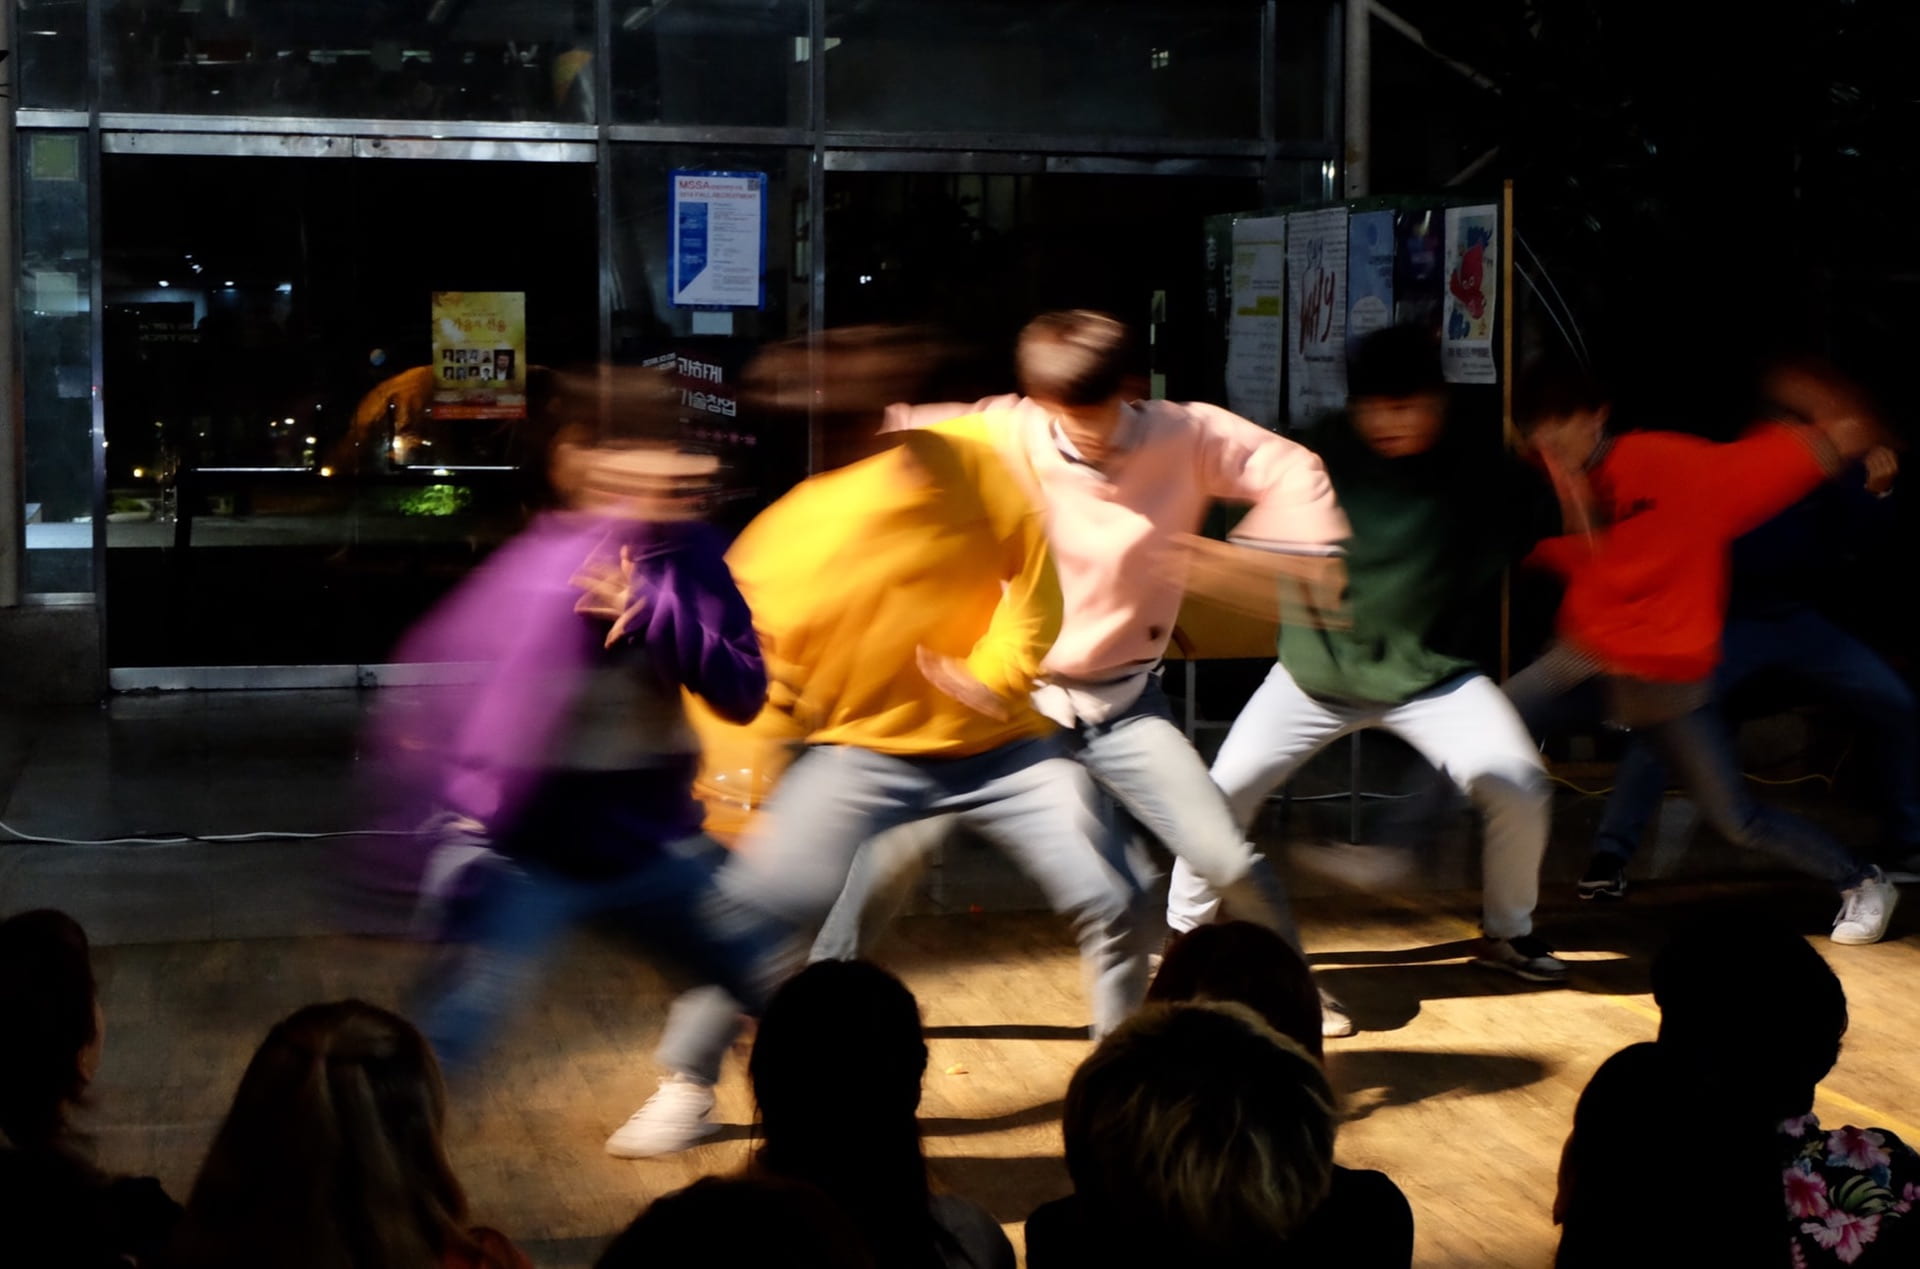 Five men dancing - the image is very blurred as they are moving quickly